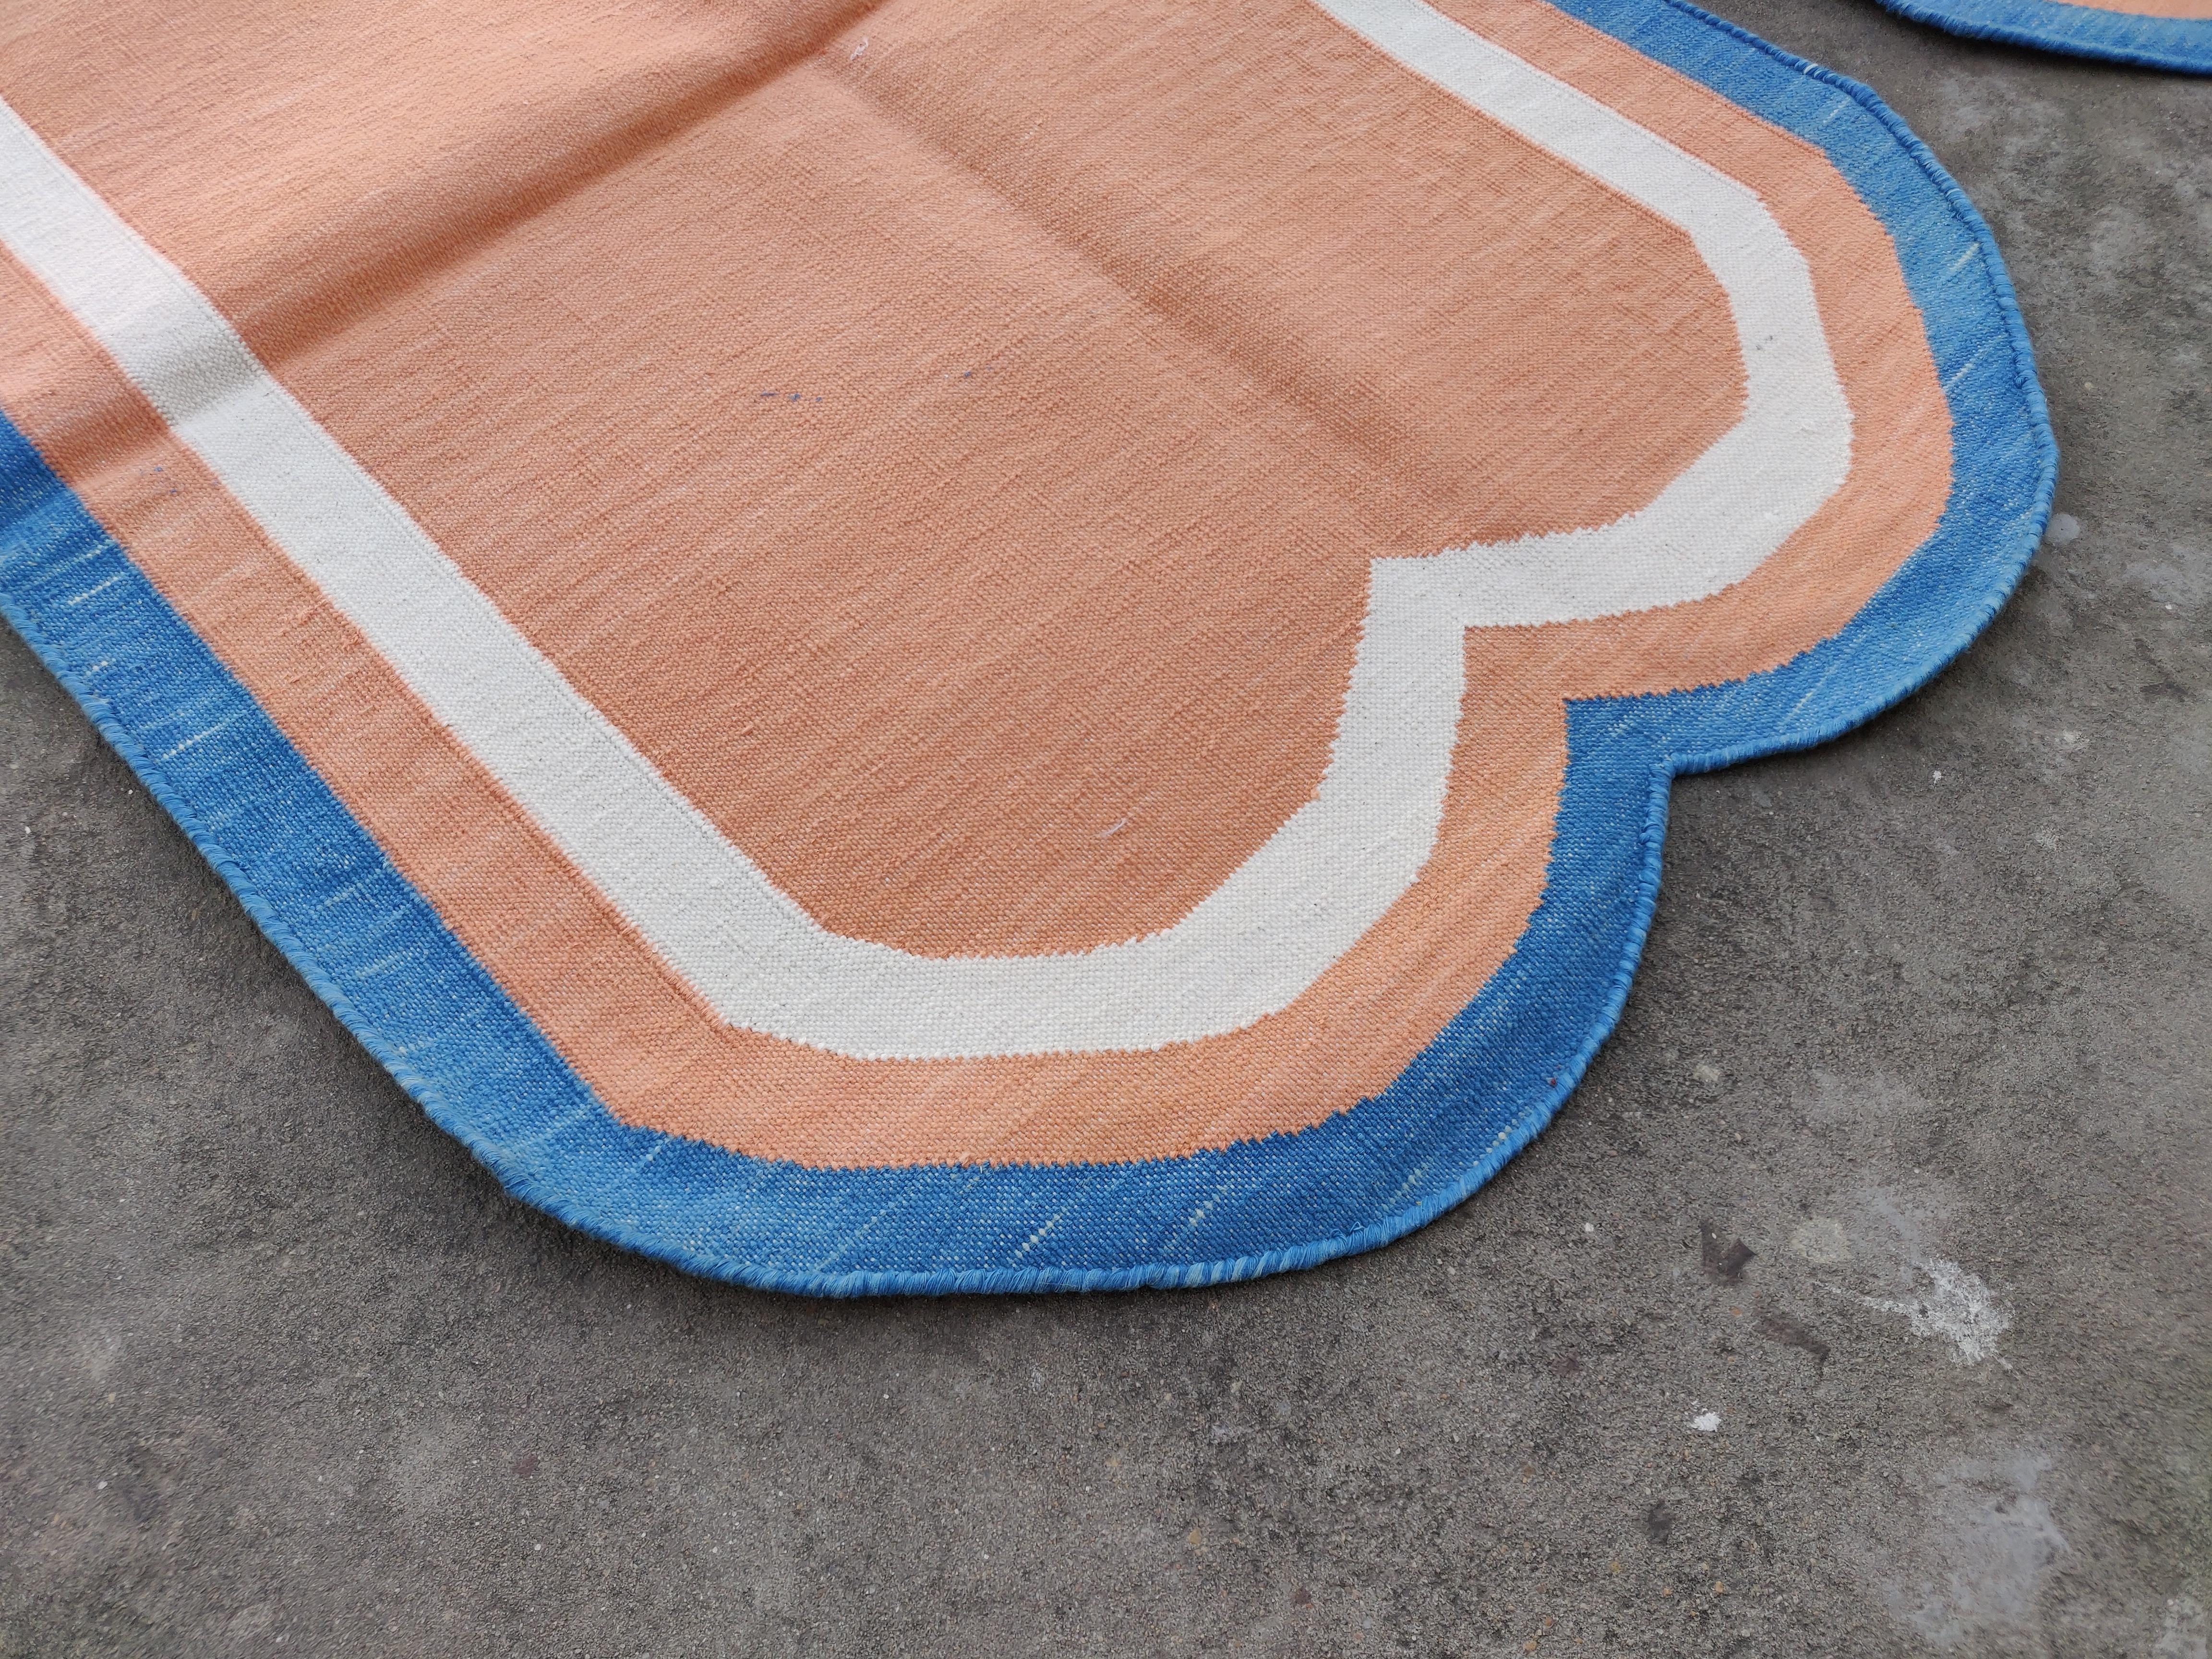 Mid-Century Modern Handmade Cotton Area Flat Weave Rug, 2x3 Coral And Blue Scalloped Indian Dhurrie For Sale